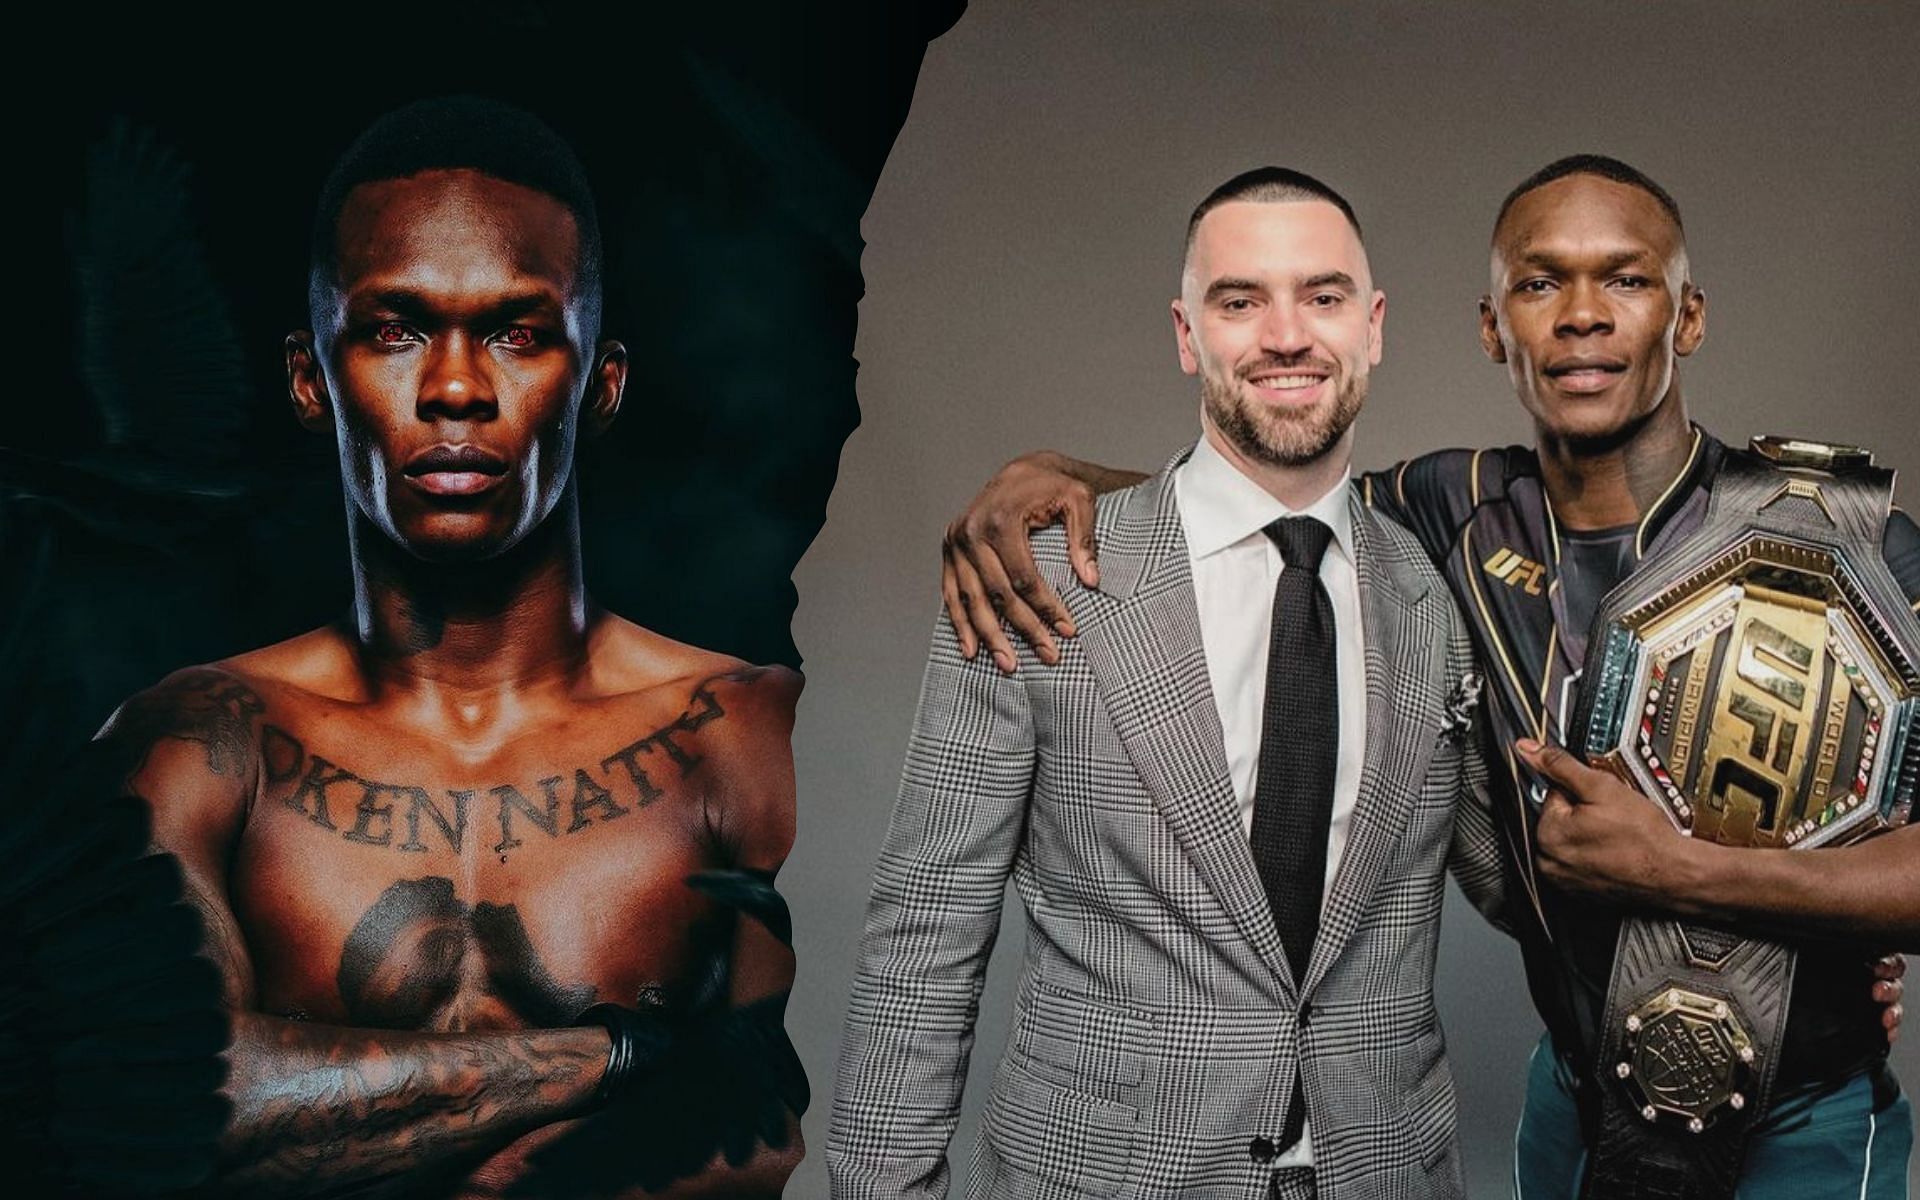 Tim Simpson speaks about Israel Adesanya&rsquo;s battle with darkness during UFC 287 fight week. [Image credits: @timsimpson and @